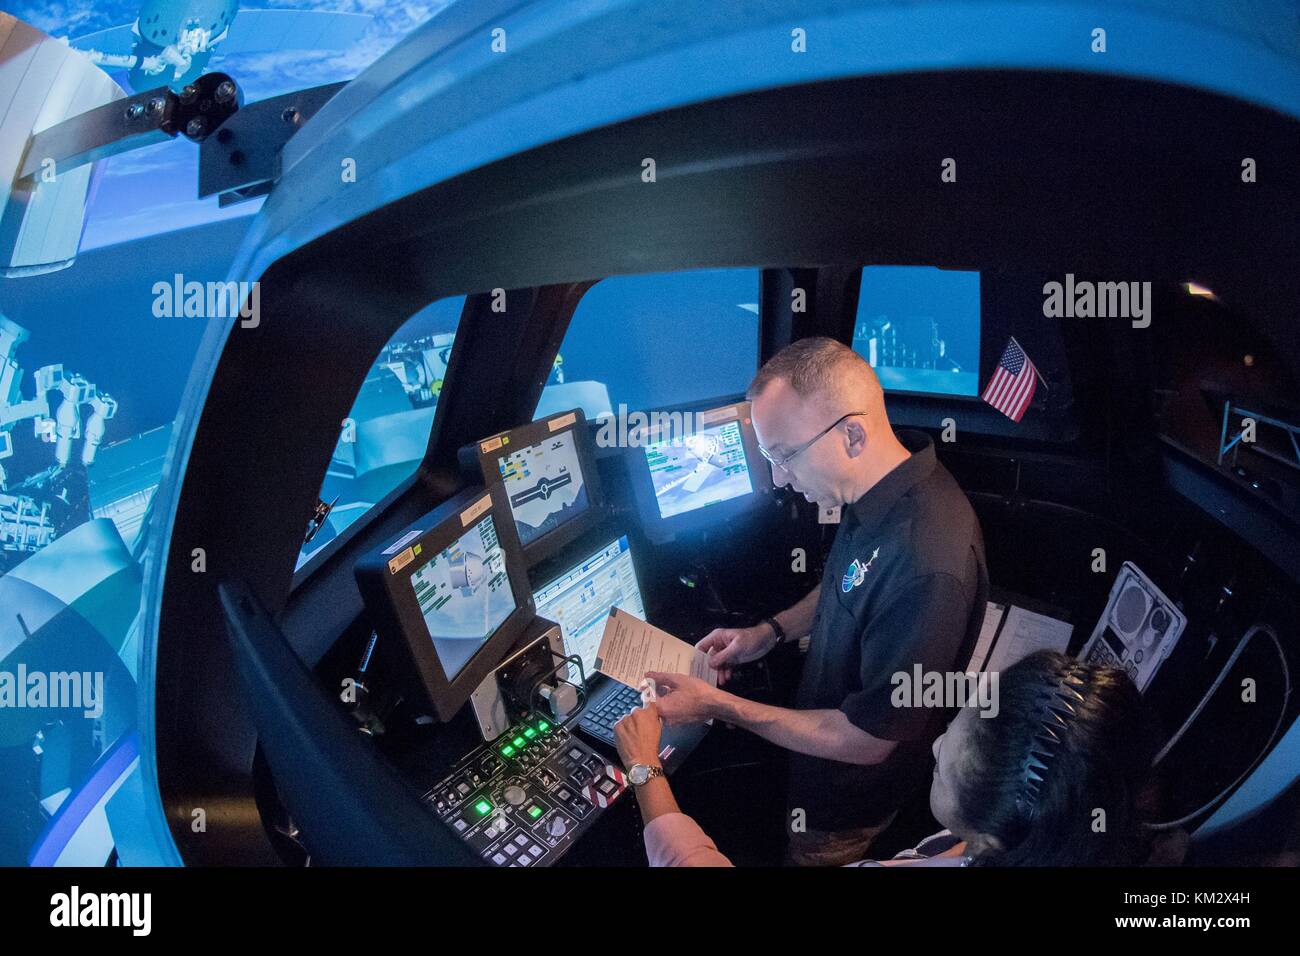 Expedition 53 American astronaut Randy Bresnik during simulation training in the Cupola robotics class in Alpha Dome at the Johnson Space Center in Houston, Texas. The simulator allows astronauts to practice the remote manipulator Canada Arm 2 without being in space. Stock Photo